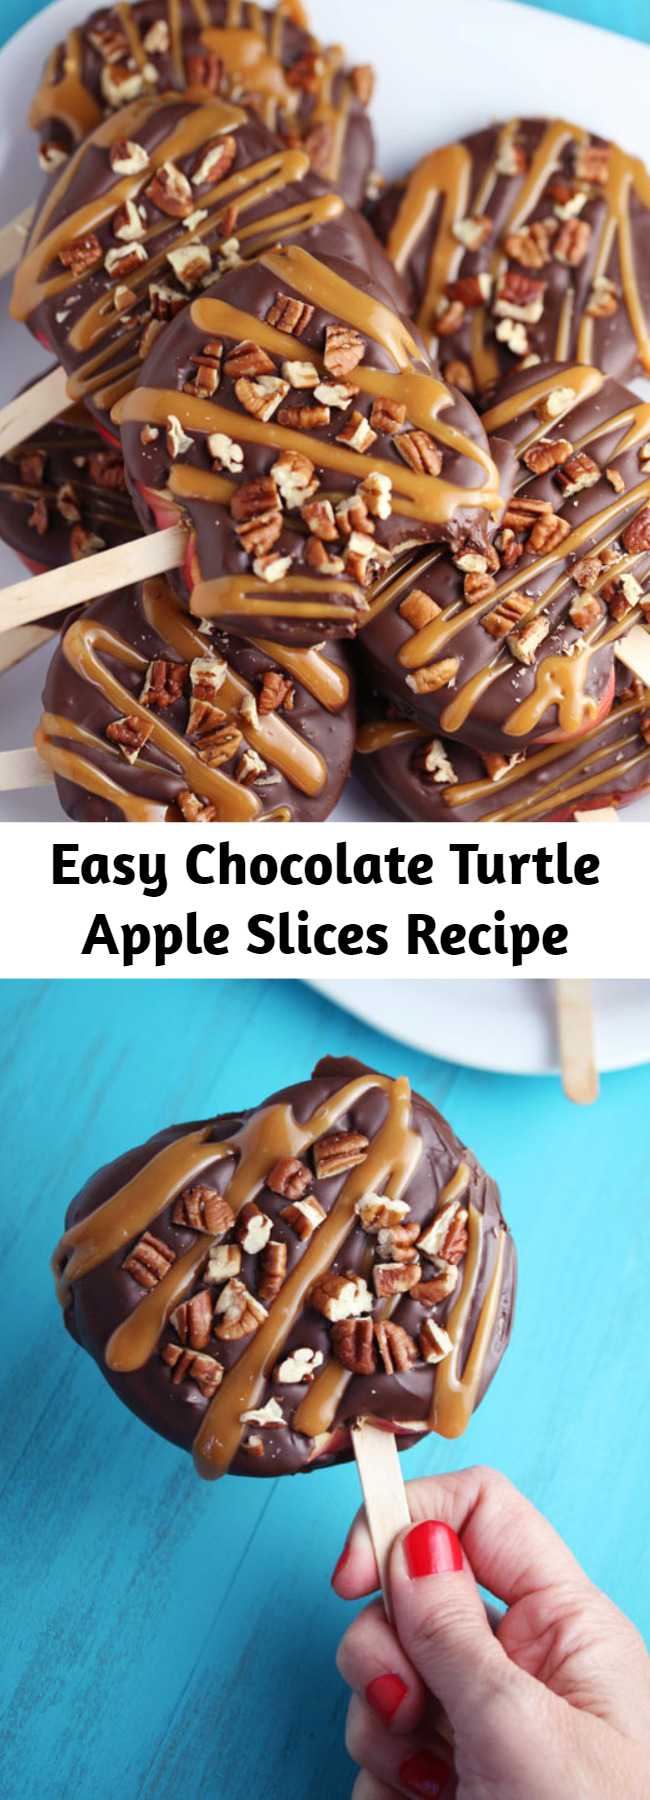 Easy Chocolate Turtle Apple Slices Recipe - Chocolate Turtle Apple Slices are thick slices of Fuji apples covered in melted chocolate, drizzled with caramel and topped with nuts.